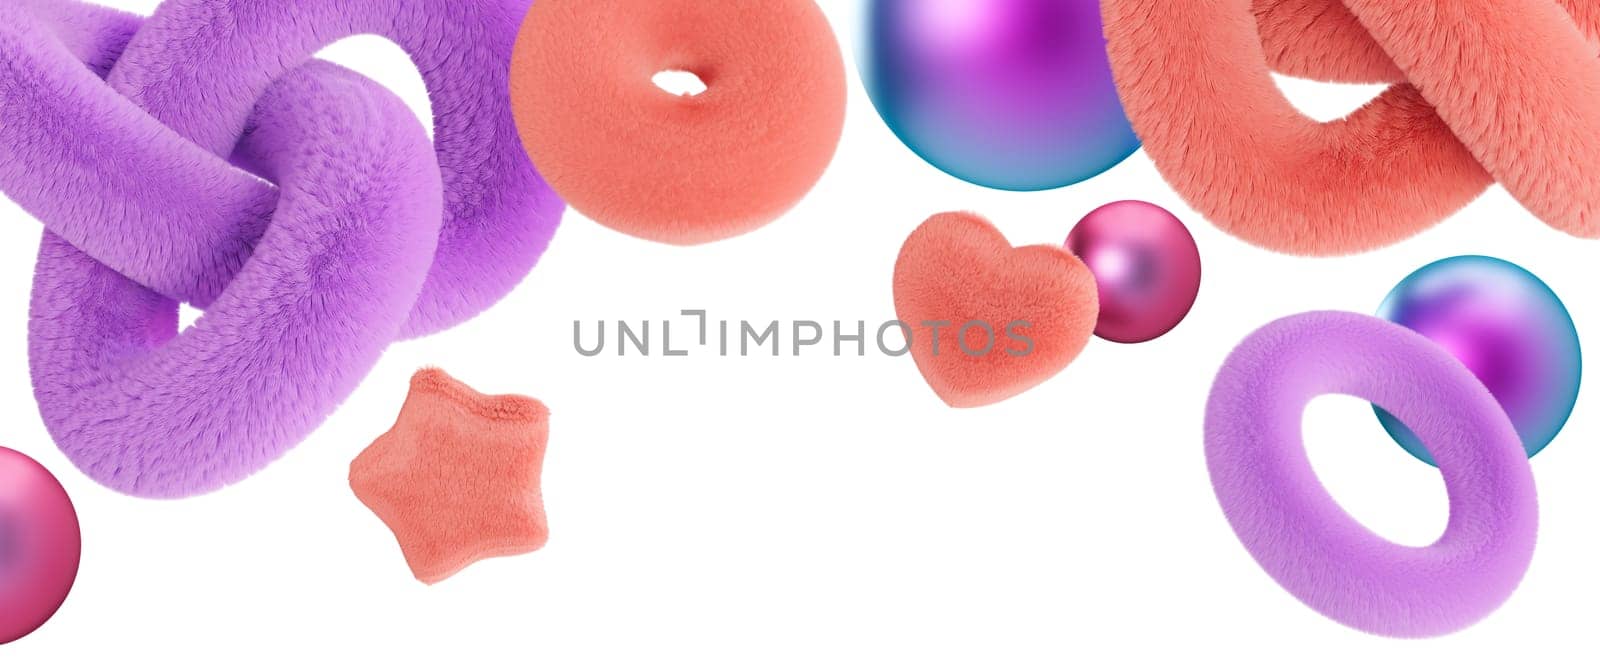 Playful header with abstract, fluffy and metallic 3D shapes, isolated on white background. Modern border. Pink and purple colors. Y2k style. Girlish design. Top of the sheet. Cut out. 3D render. by creativebird